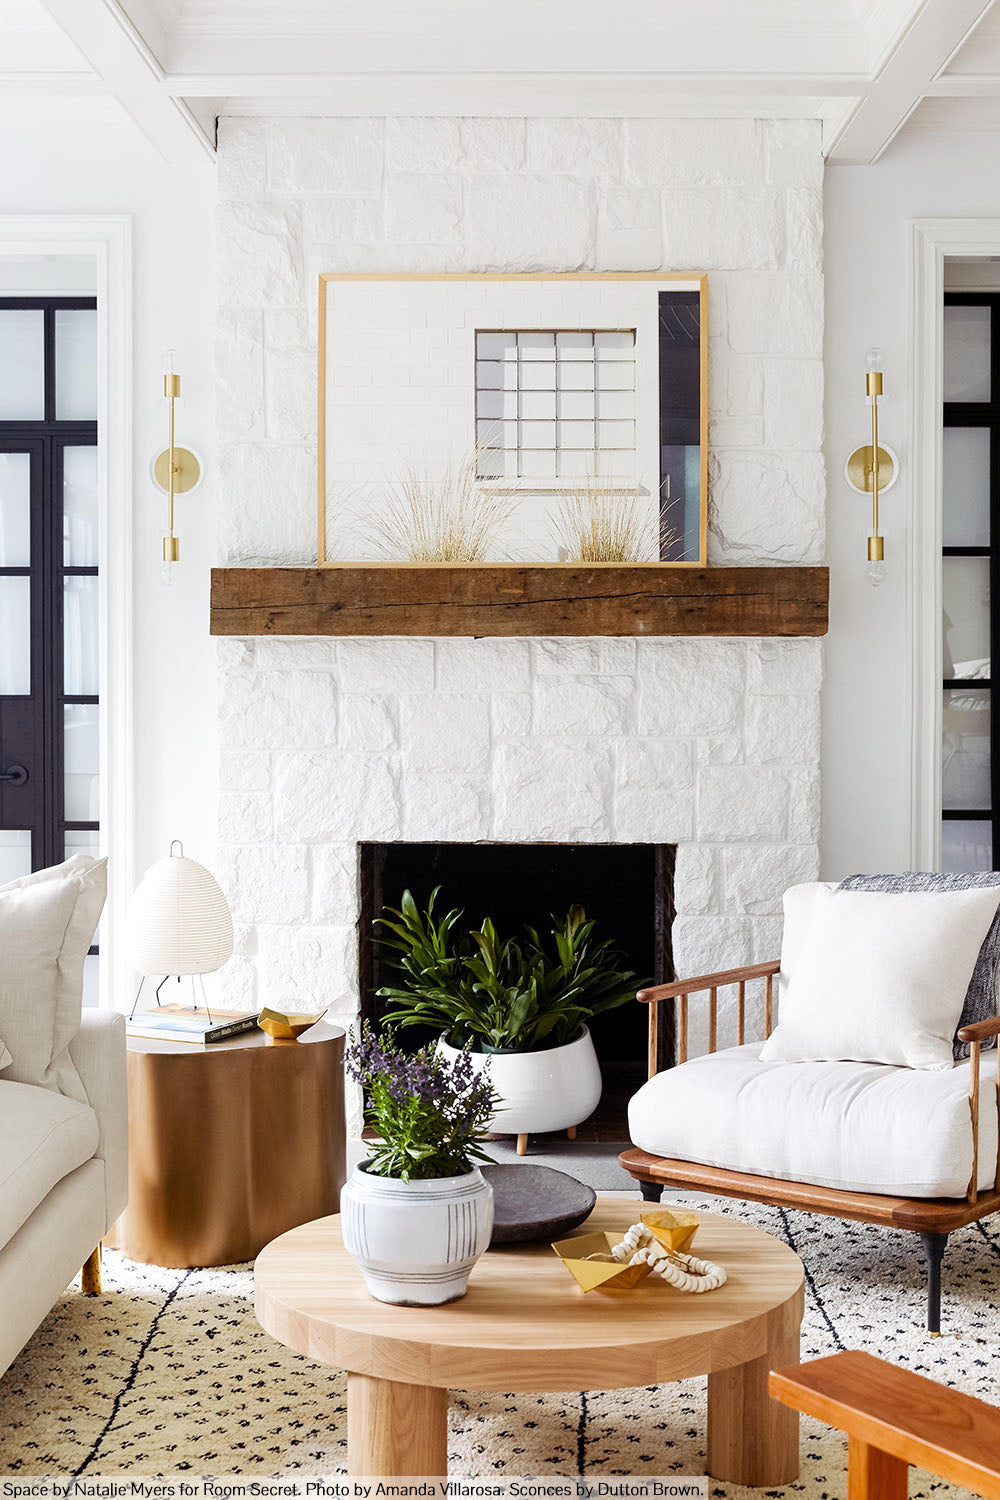 Brass Bianca sconce 20" by Dutton Brown. Space by Natalie Myers for Room Secret. Photo by Amanda Villanueva.